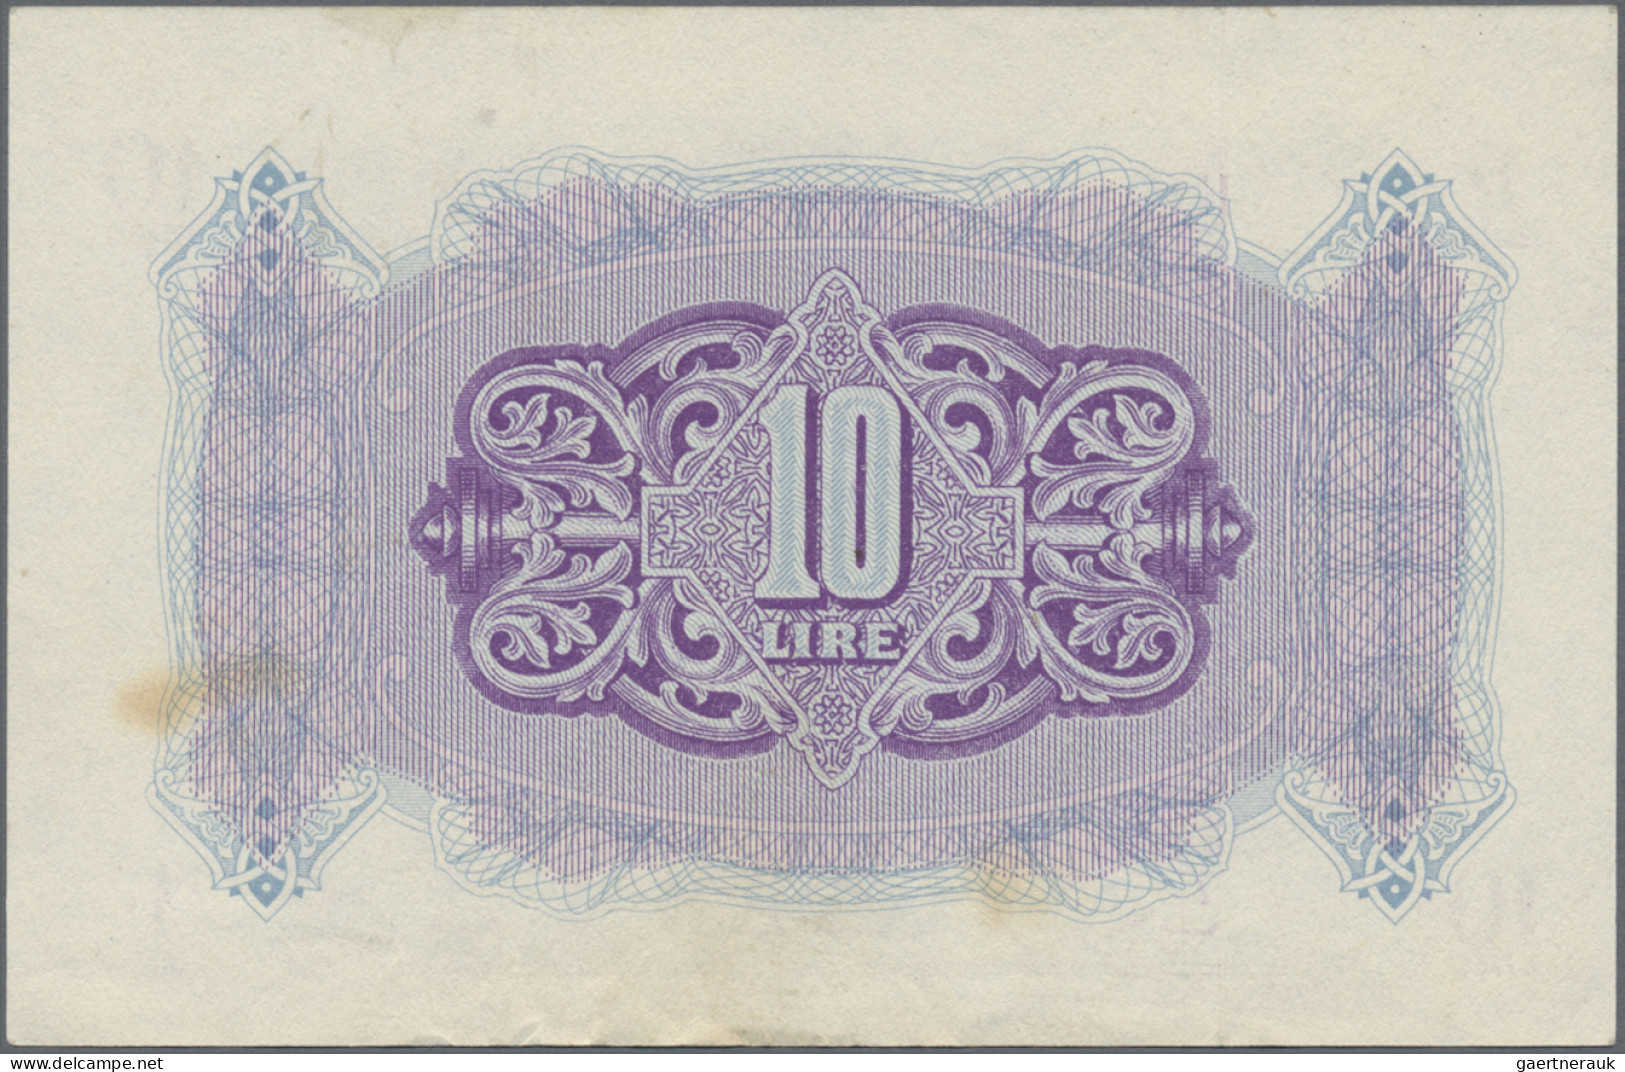 Libya: Military Authority in Tripolitania, set with 4 banknotes, series ND(1943)